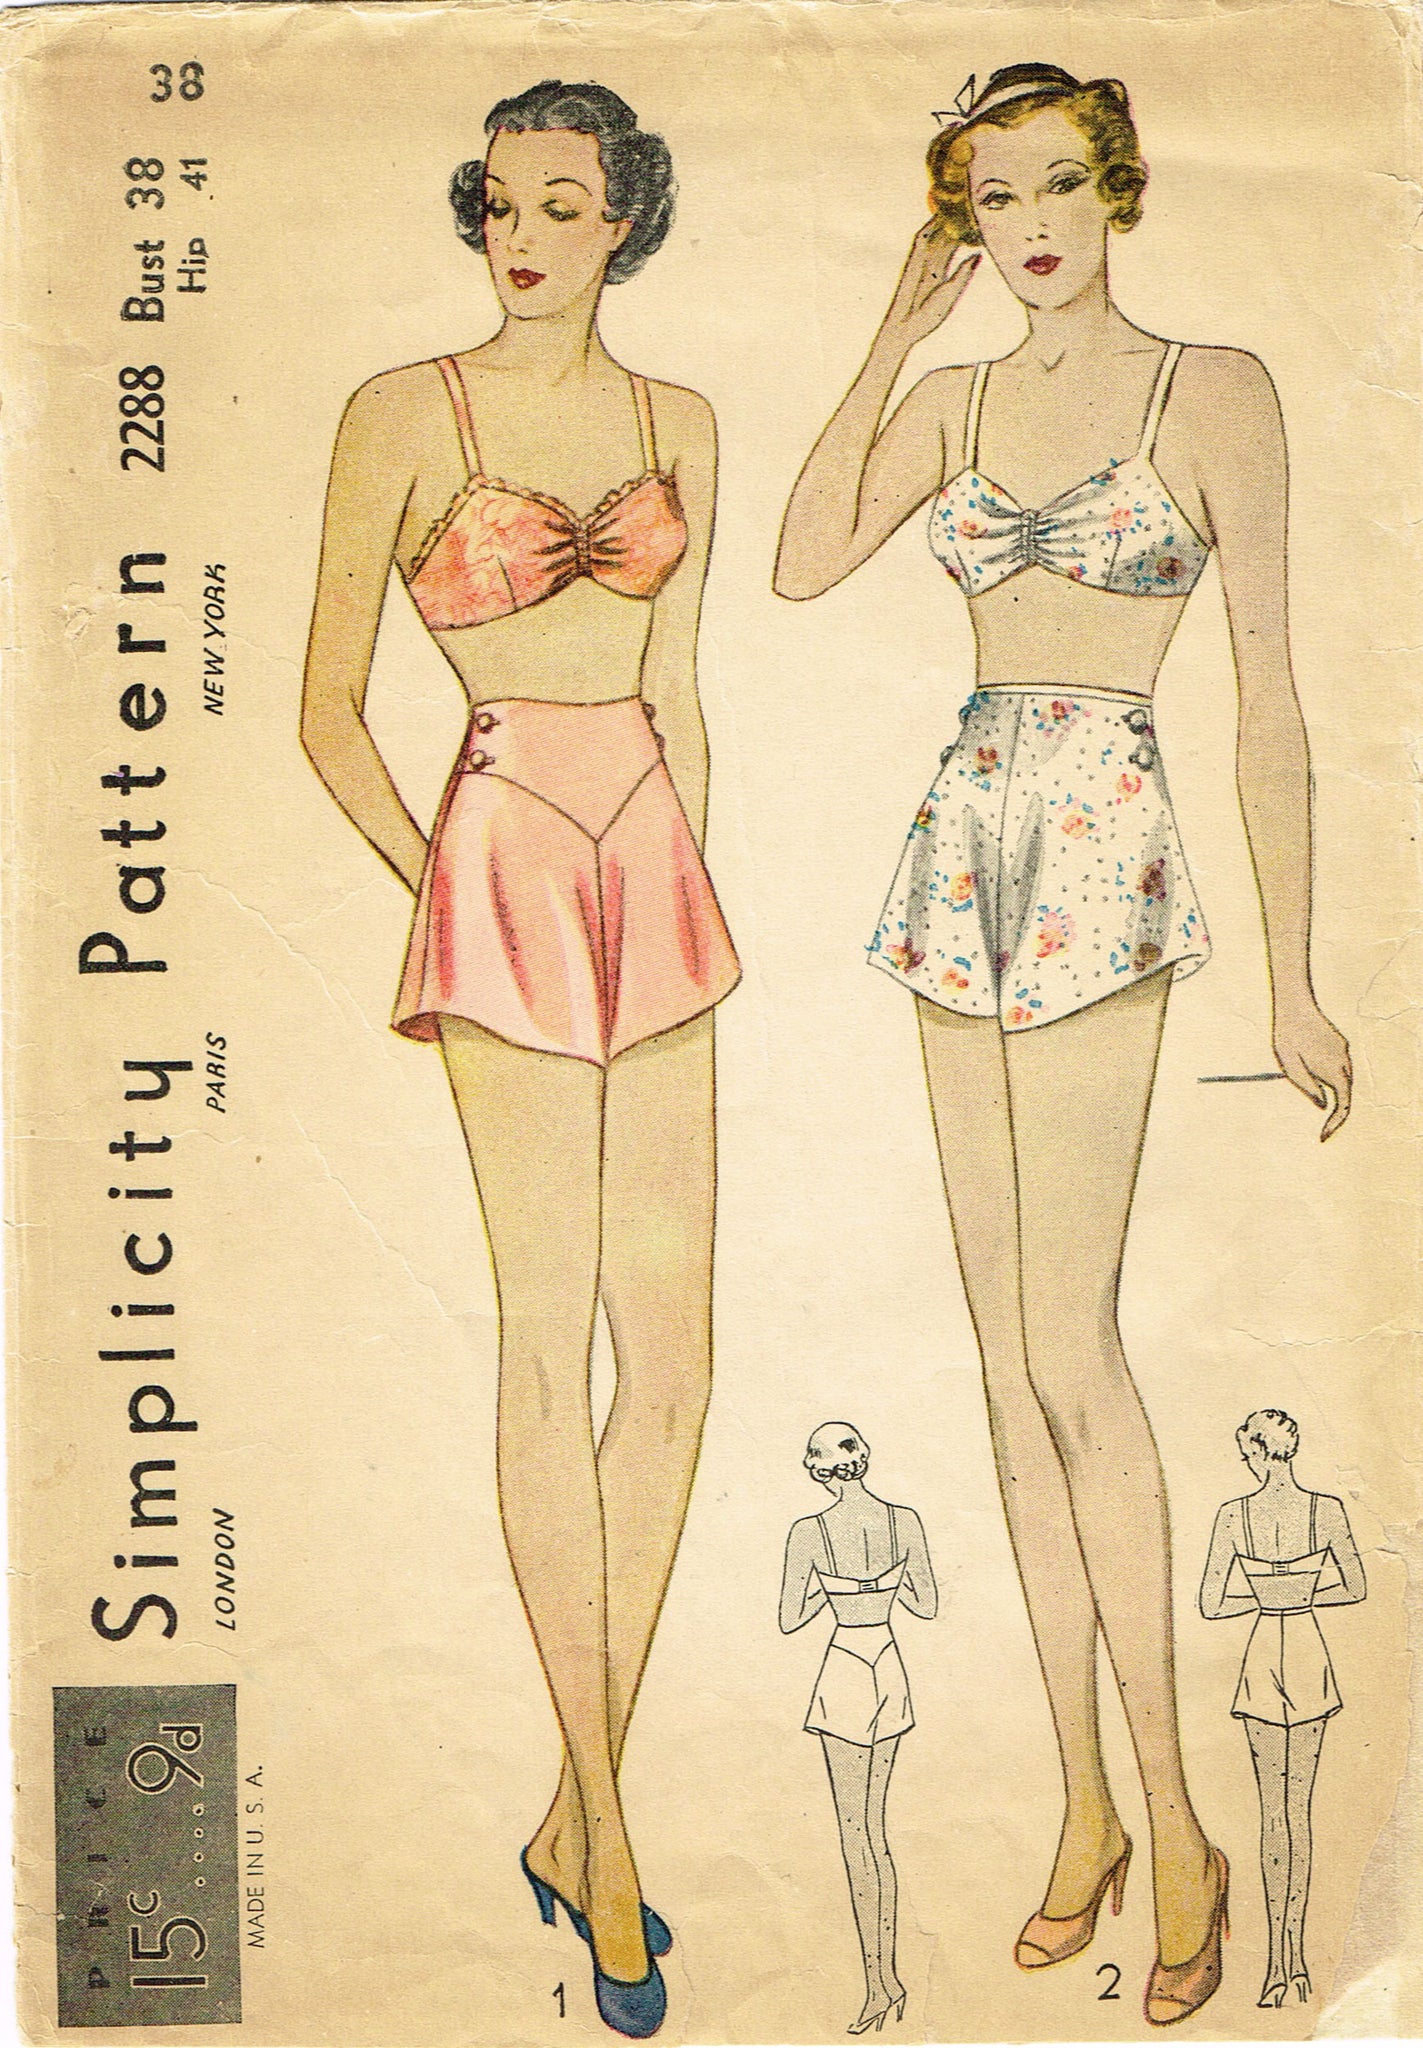  Simplicity 1930's Fashion Women's Vintage Bra and Panties Sewing  Patterns, Sizes 12-20 : Arts, Crafts & Sewing